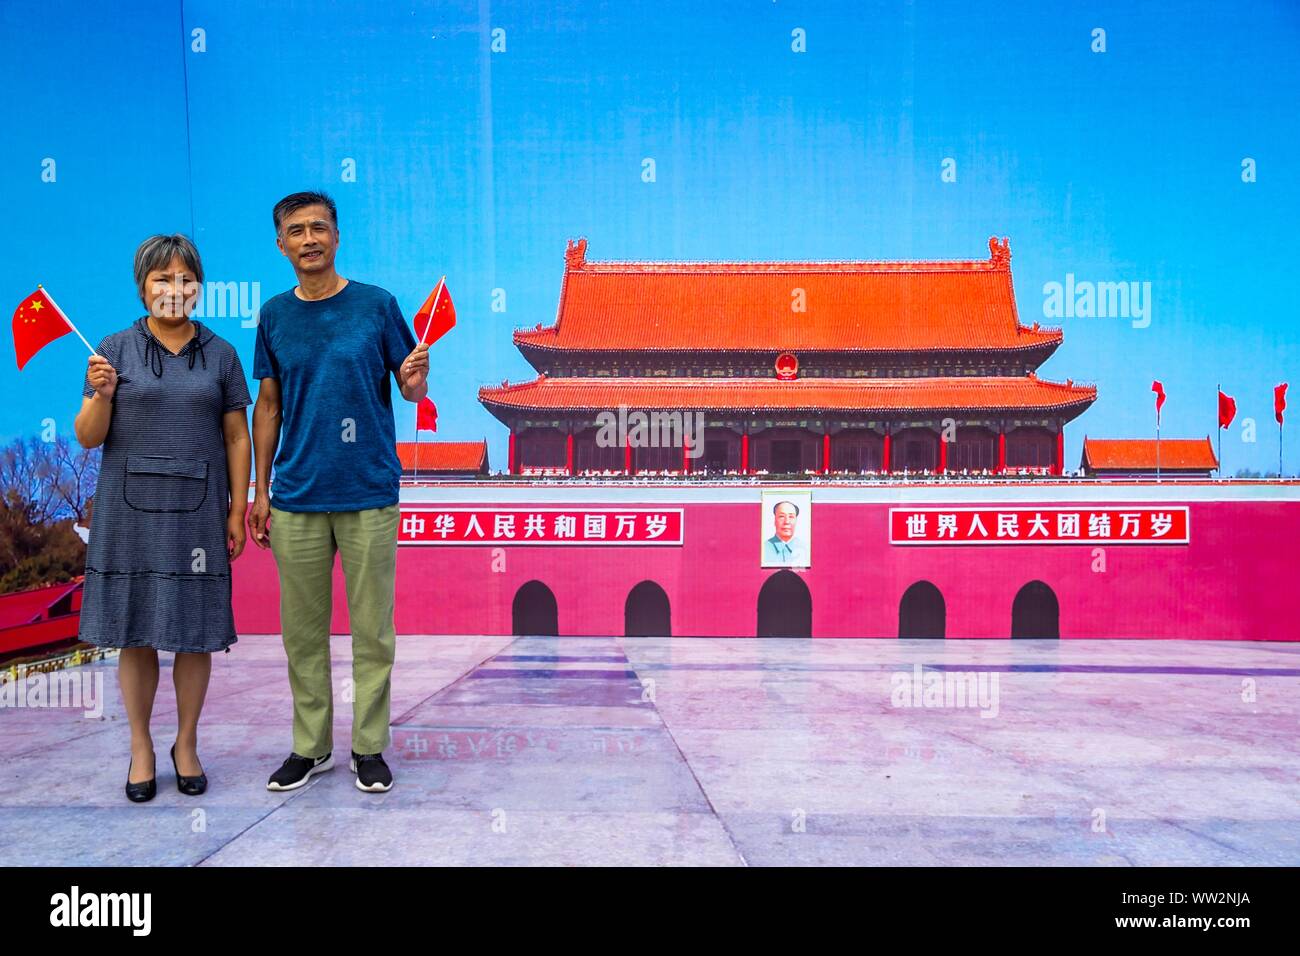 Local Chinese residents wave Chinese national flags in front of a backdrop showing the Tiananmen Rostrum during a campaign to celebrate the 70th anniv Stock Photo